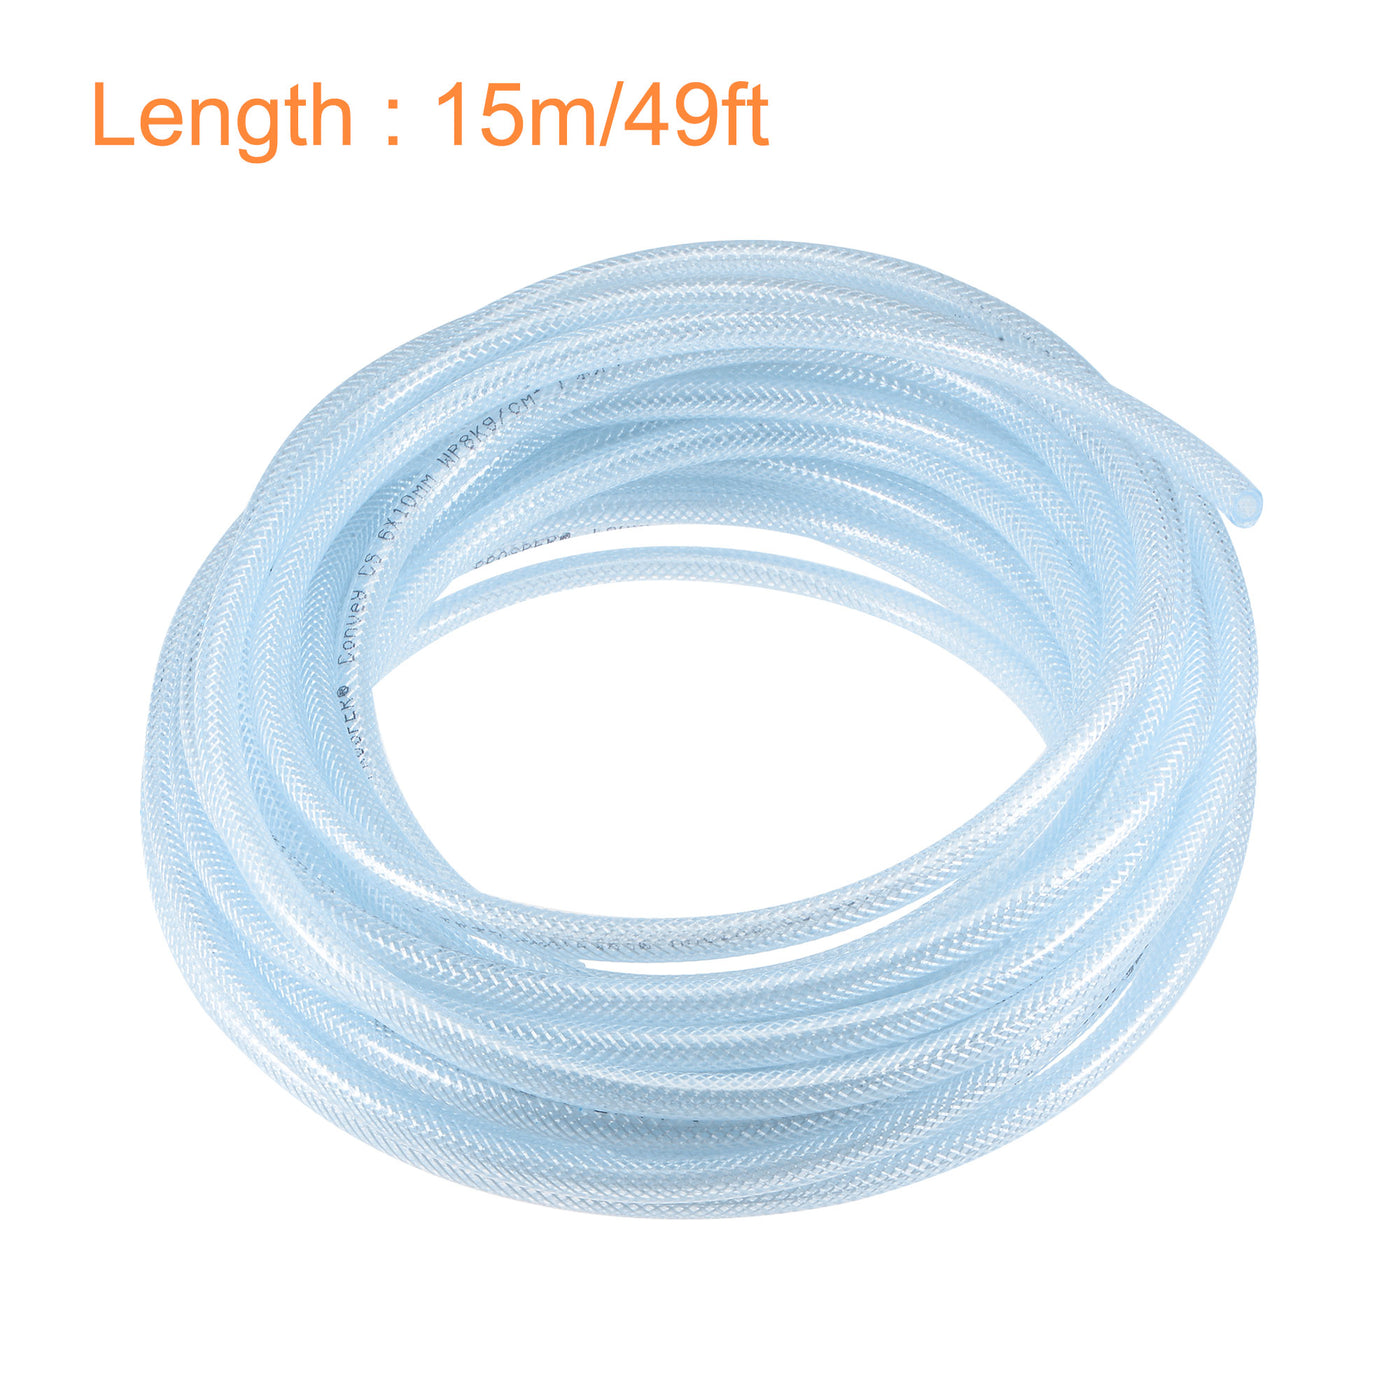 Uxcell Uxcell Braided PVC Tubing, 5/16"(8mm) ID 1/2"(12mm) OD 49ft(15m) Flexible Clear Water Hose